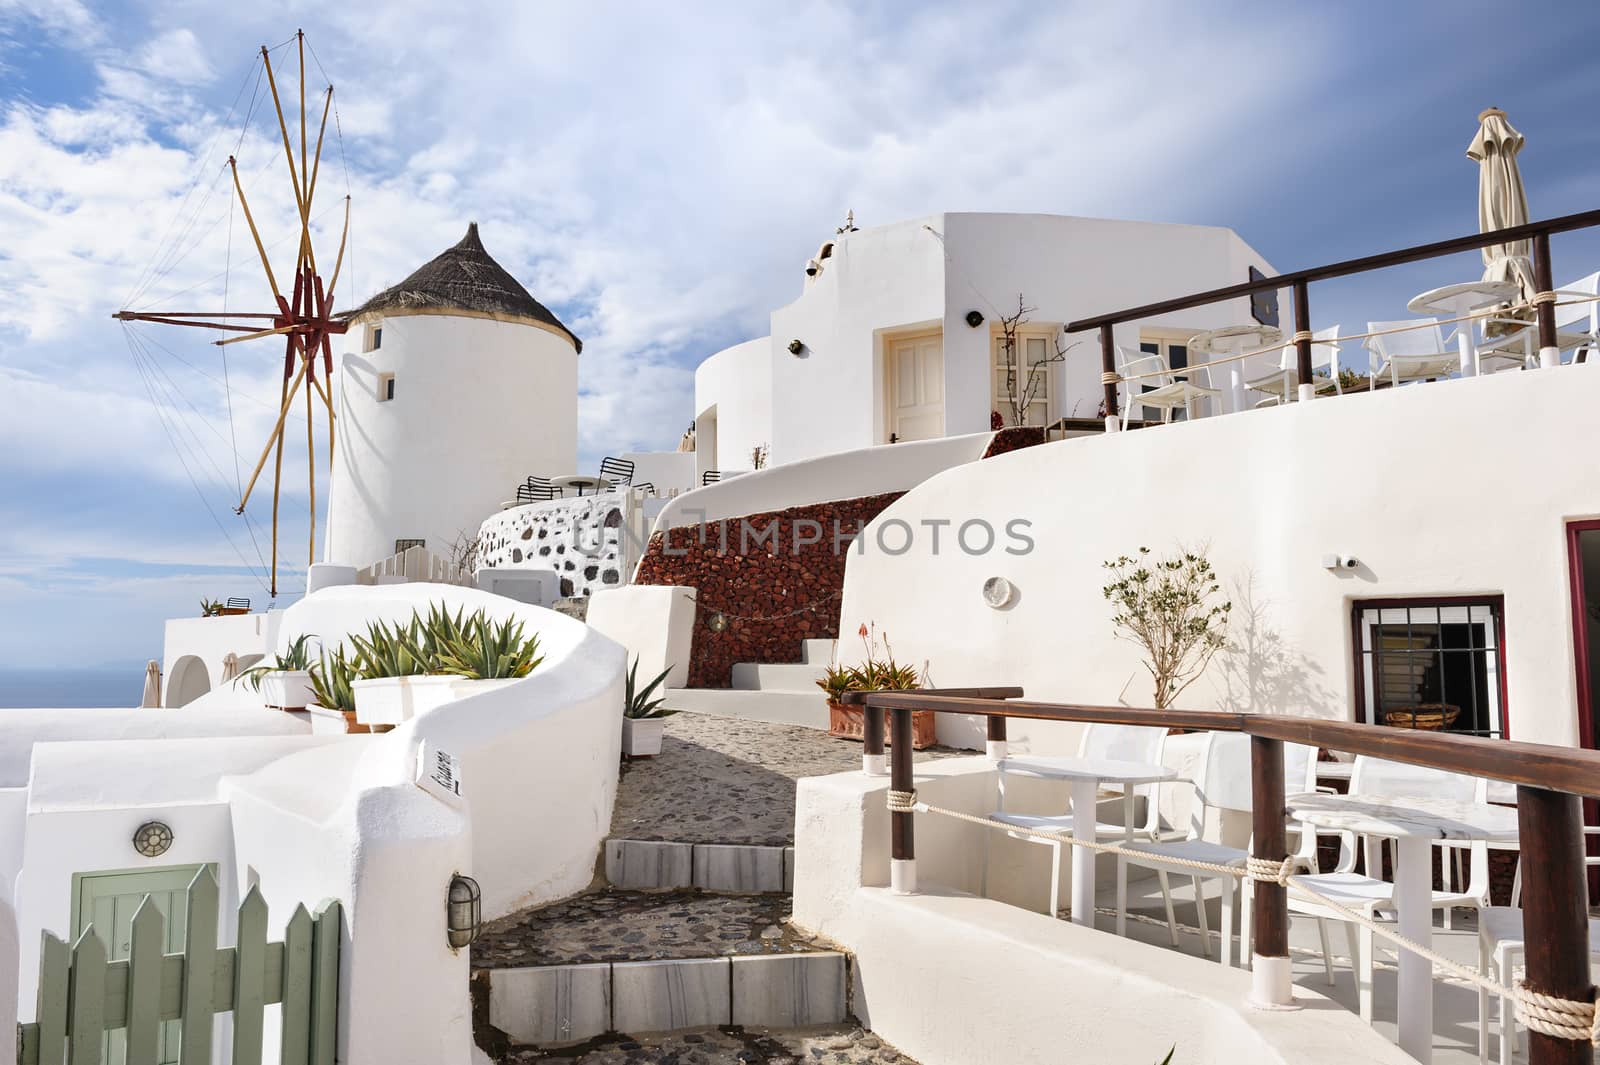 Oia before sunset at Santorini, Greece by starush